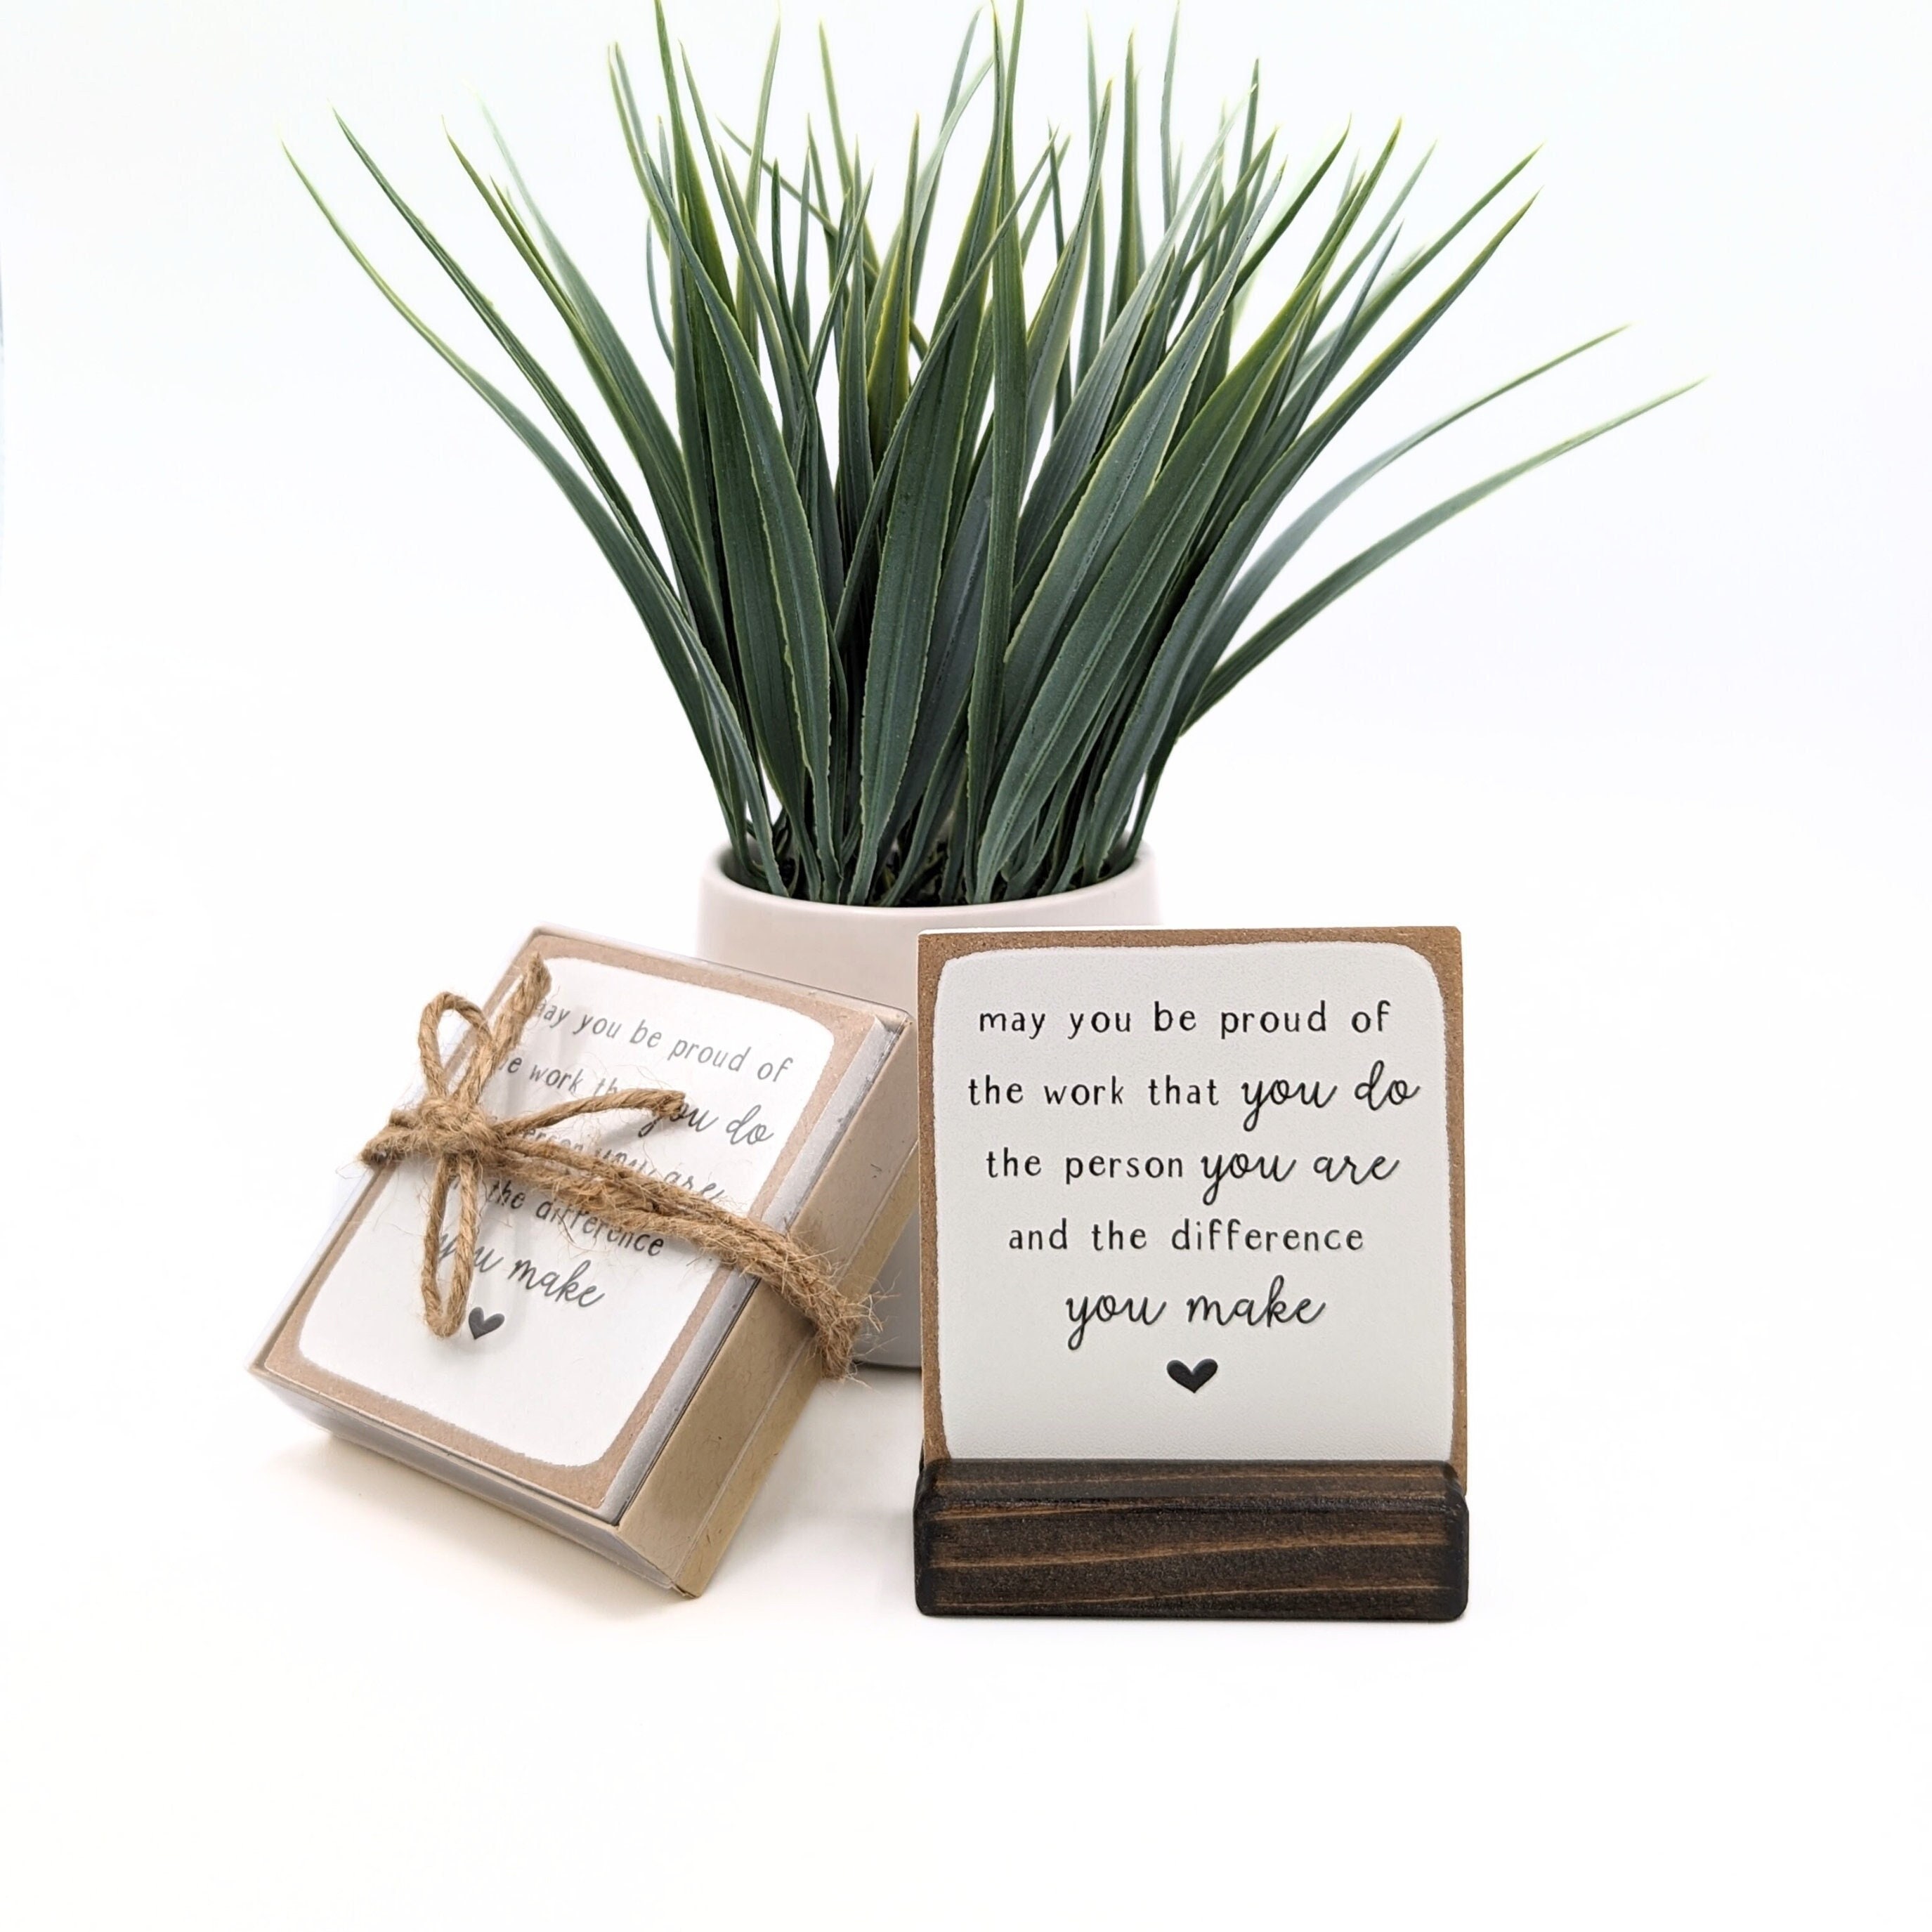  Employee Gifts for Women, Thank You Gifts for Coworkers Women  Men, Co-workers Gifts, May You Be Proud of The Work You Do, Desk Decor  Signs for Home Office, Appreciation Gift 